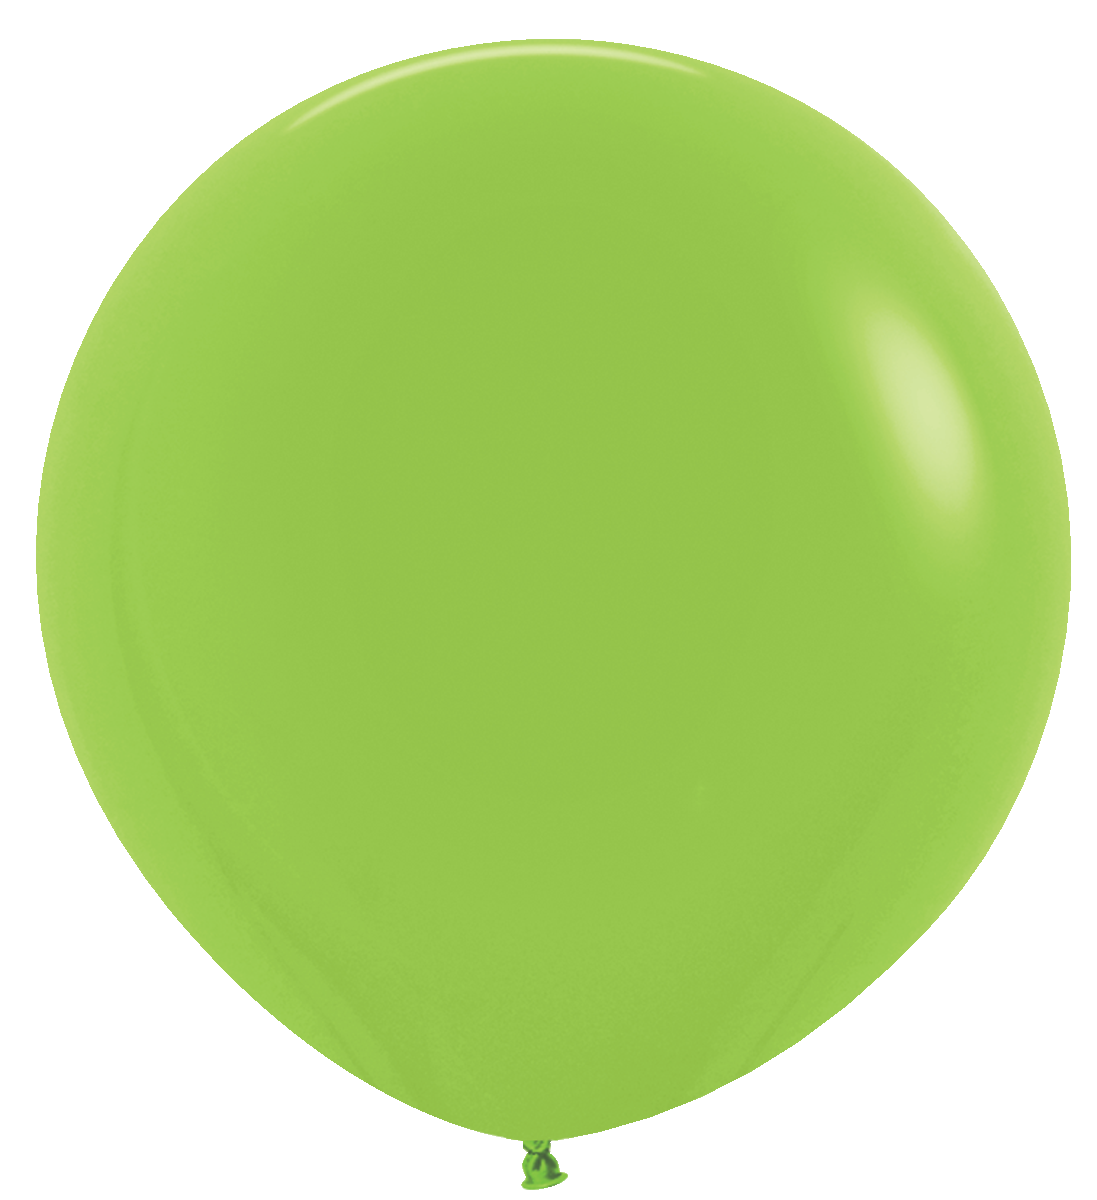 59025_dlxkeylime1200x1200.png